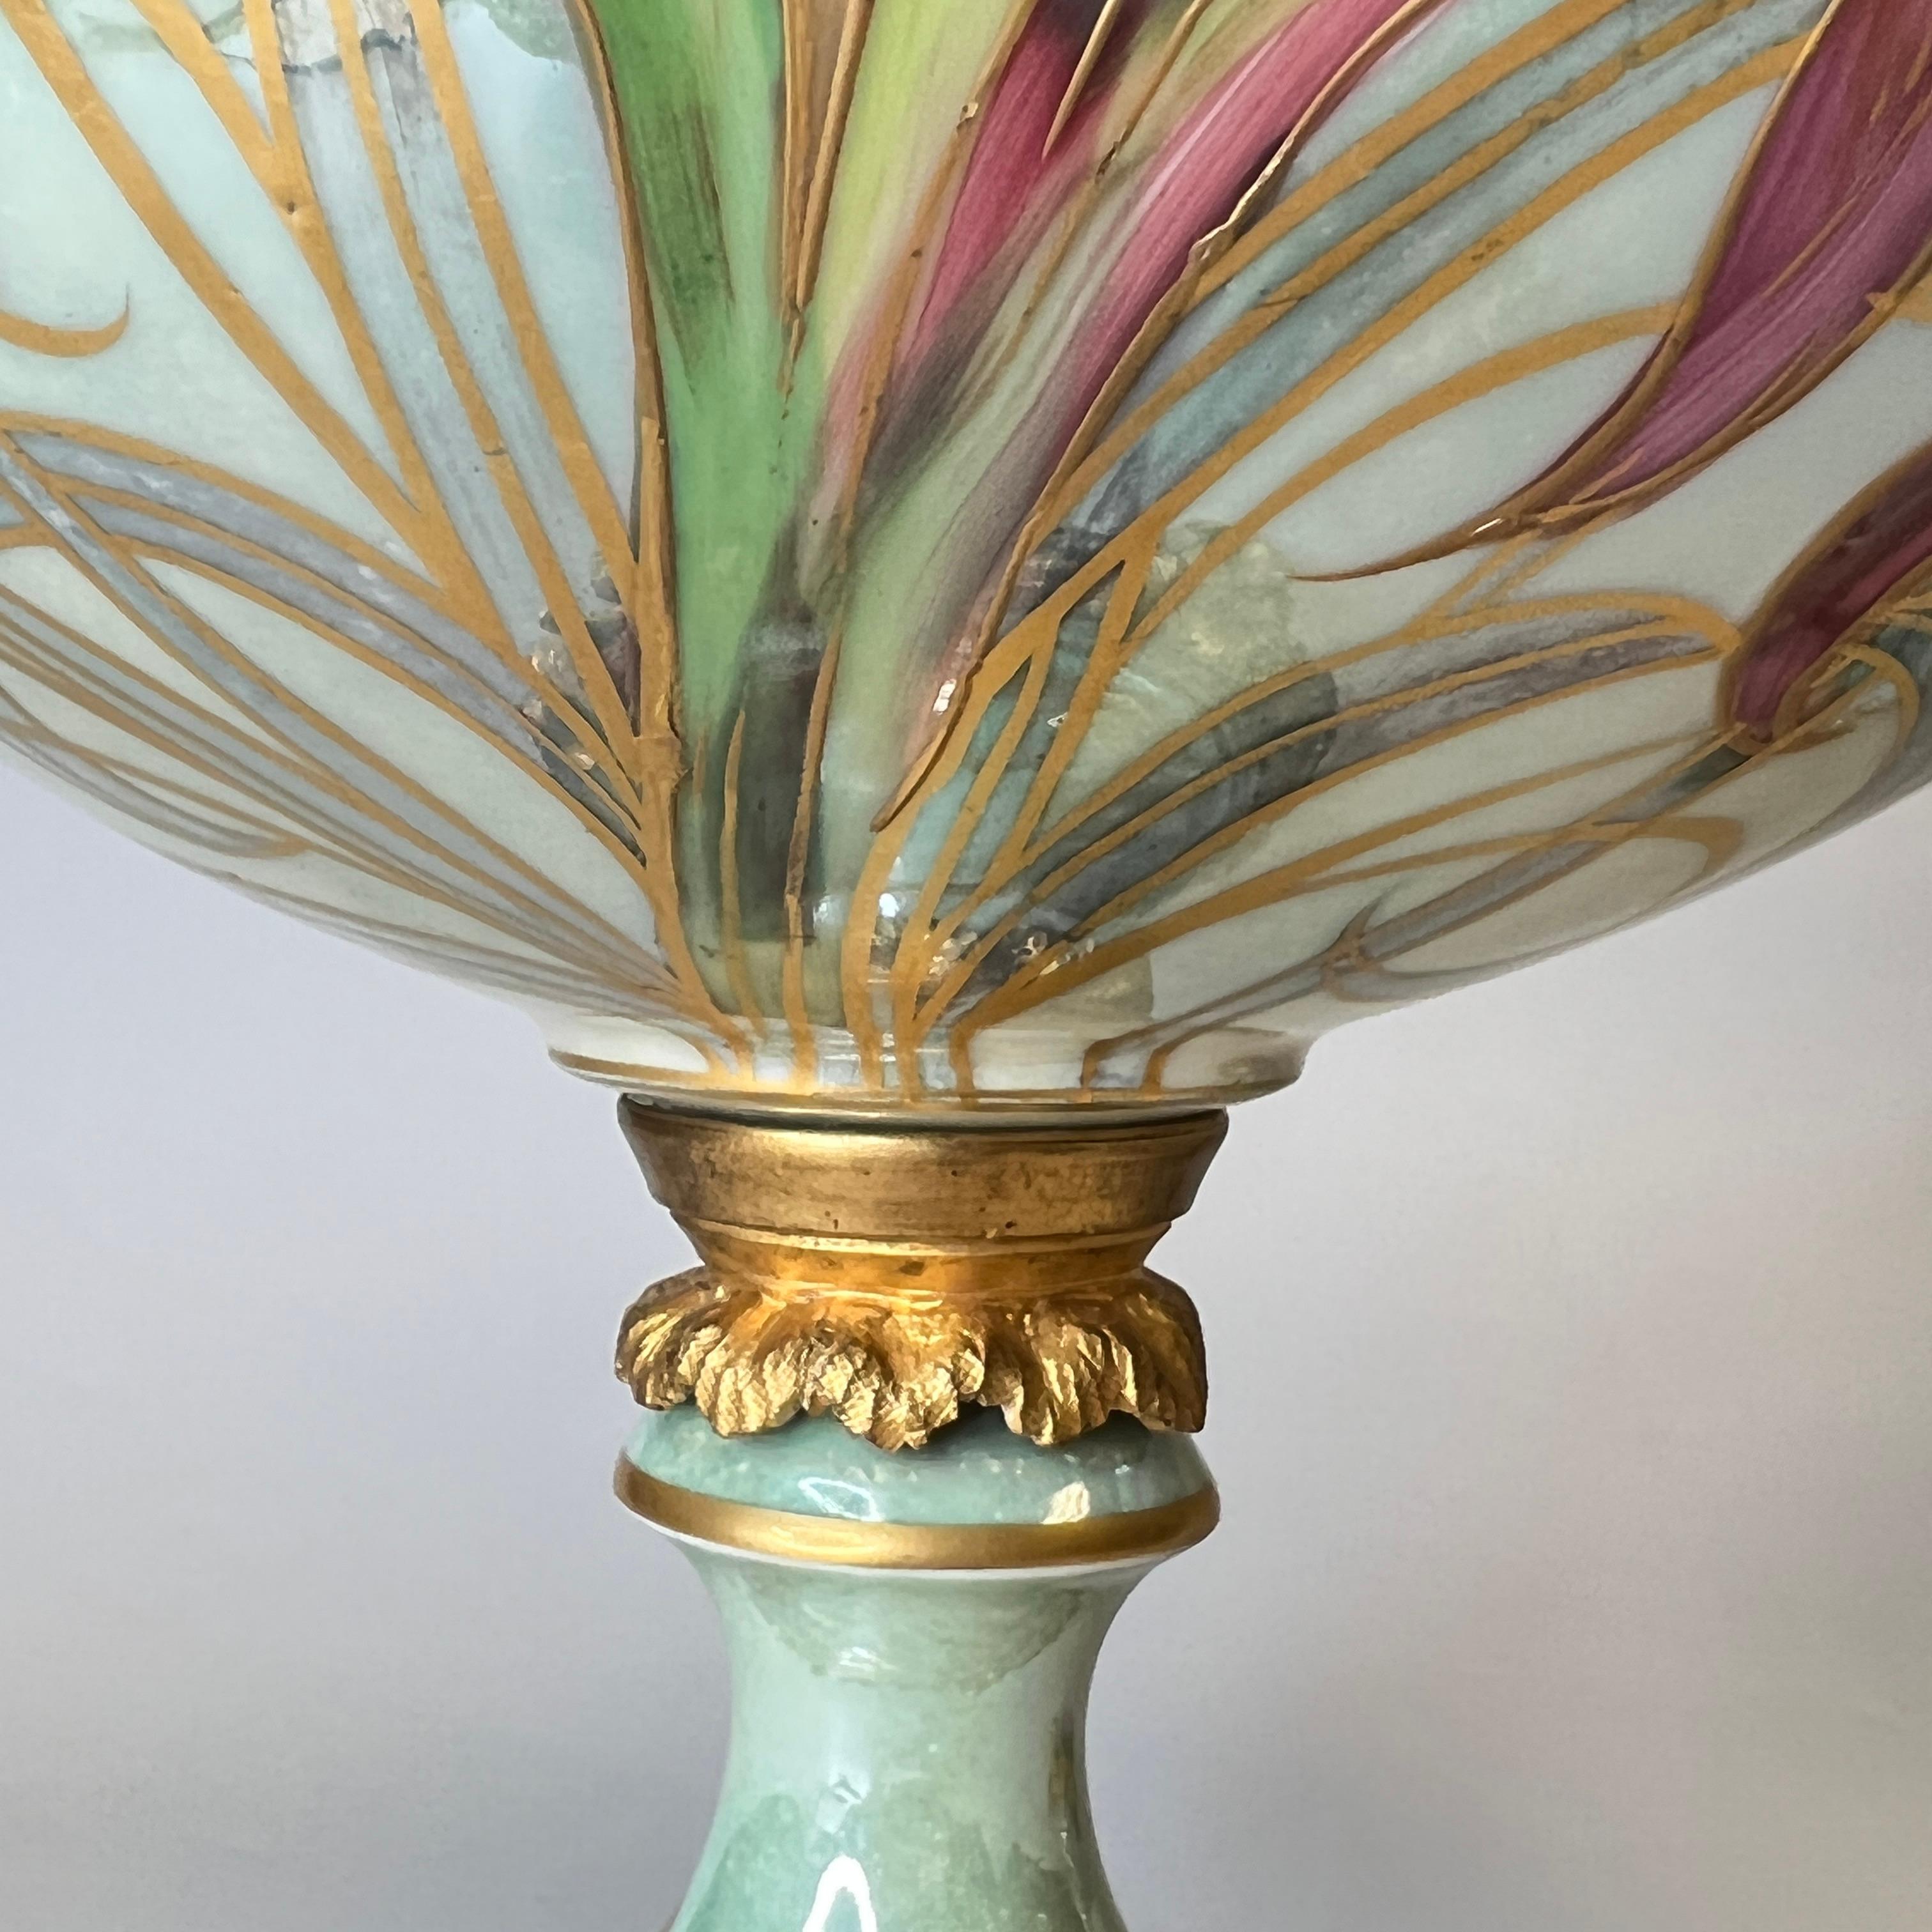 Pair of Art Nouveau Sevres Style Iridescent Porcelain Vases and Covers by Lheri For Sale 1